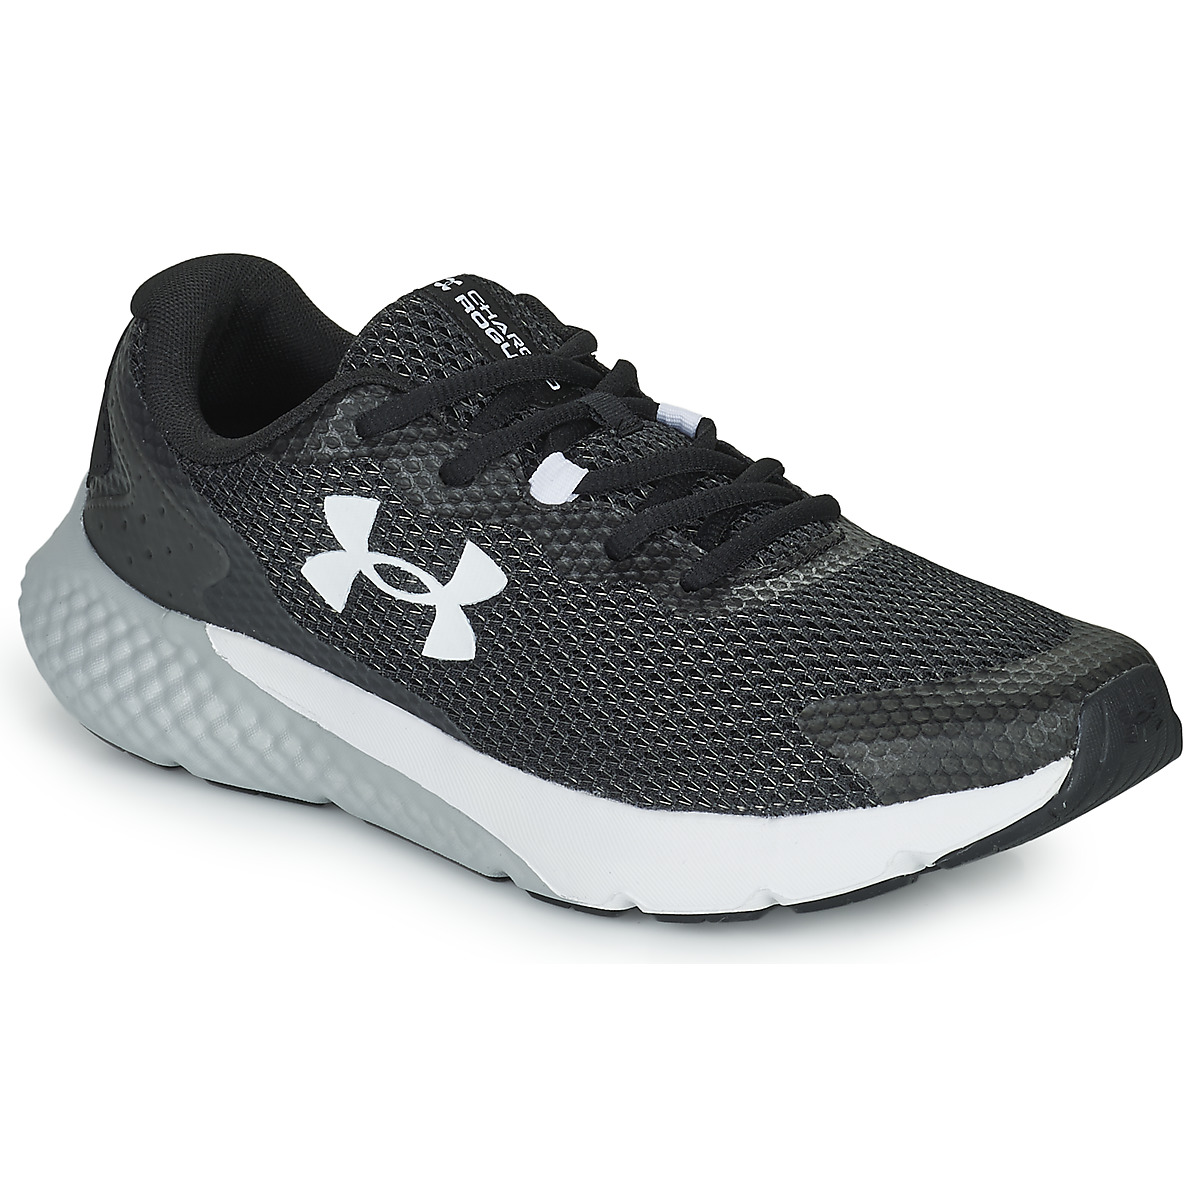 Under Armour Ua Charged Rogue 3 Black